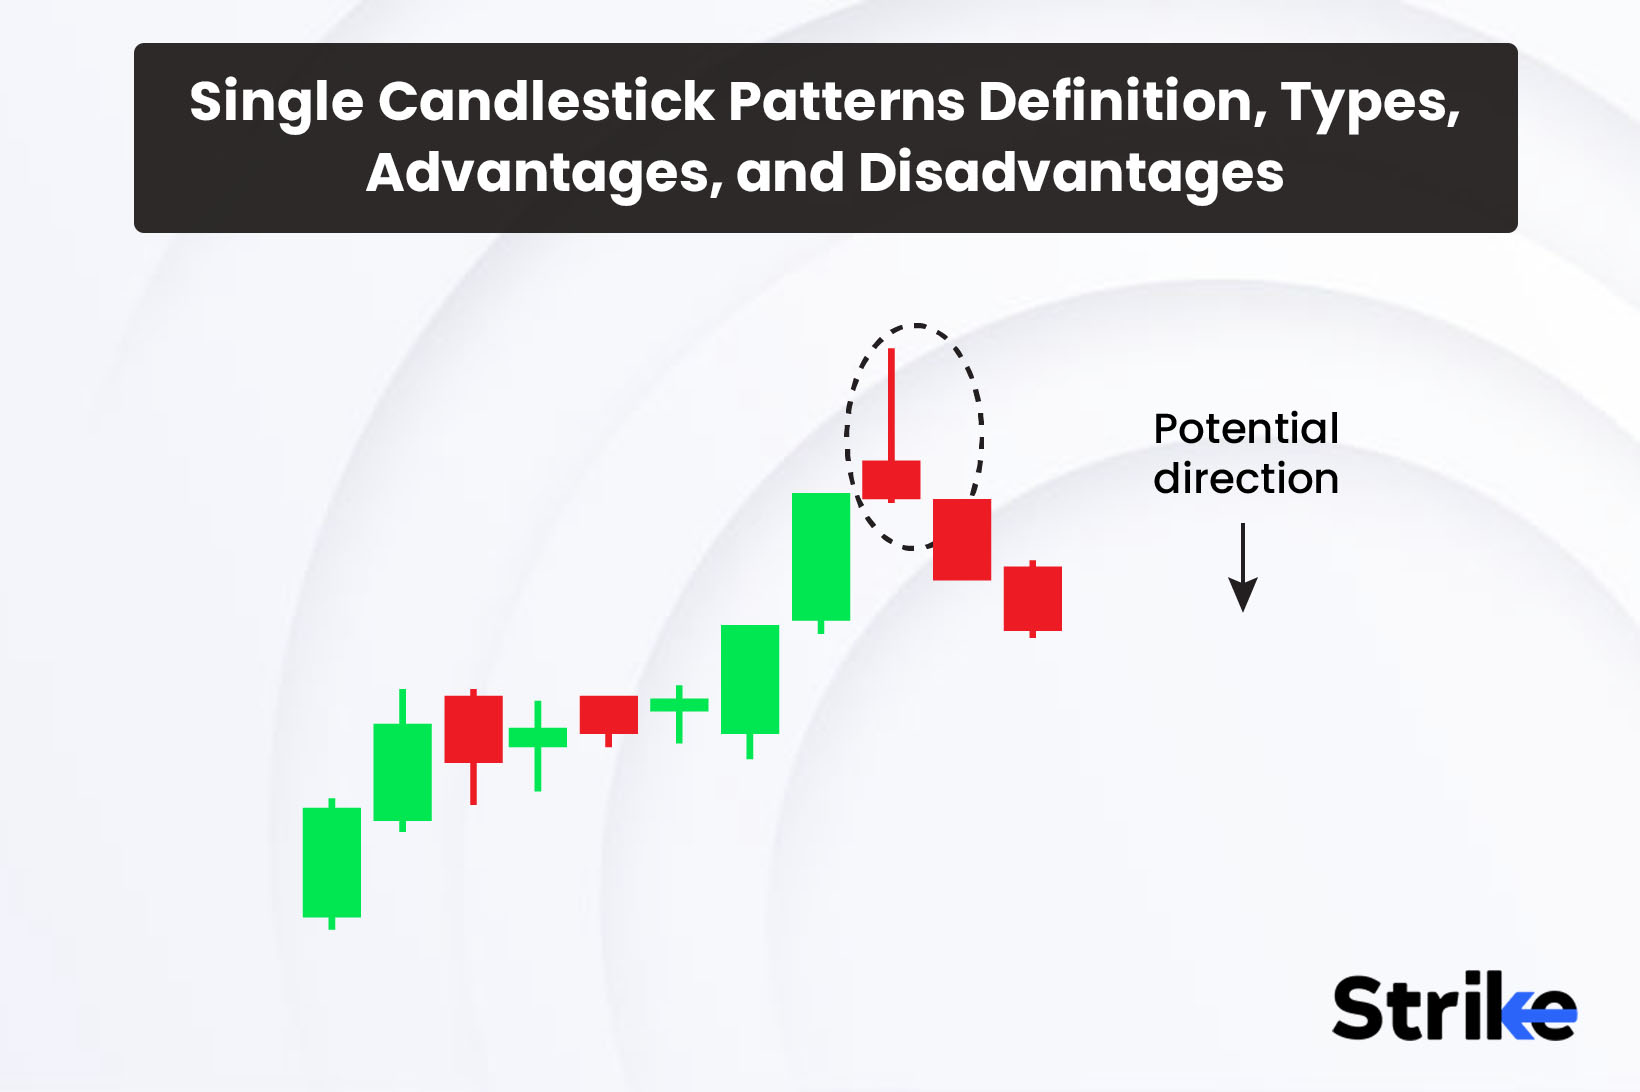 Single Candlestick Patterns: Definition, Types, Advantages, and Disadvantages